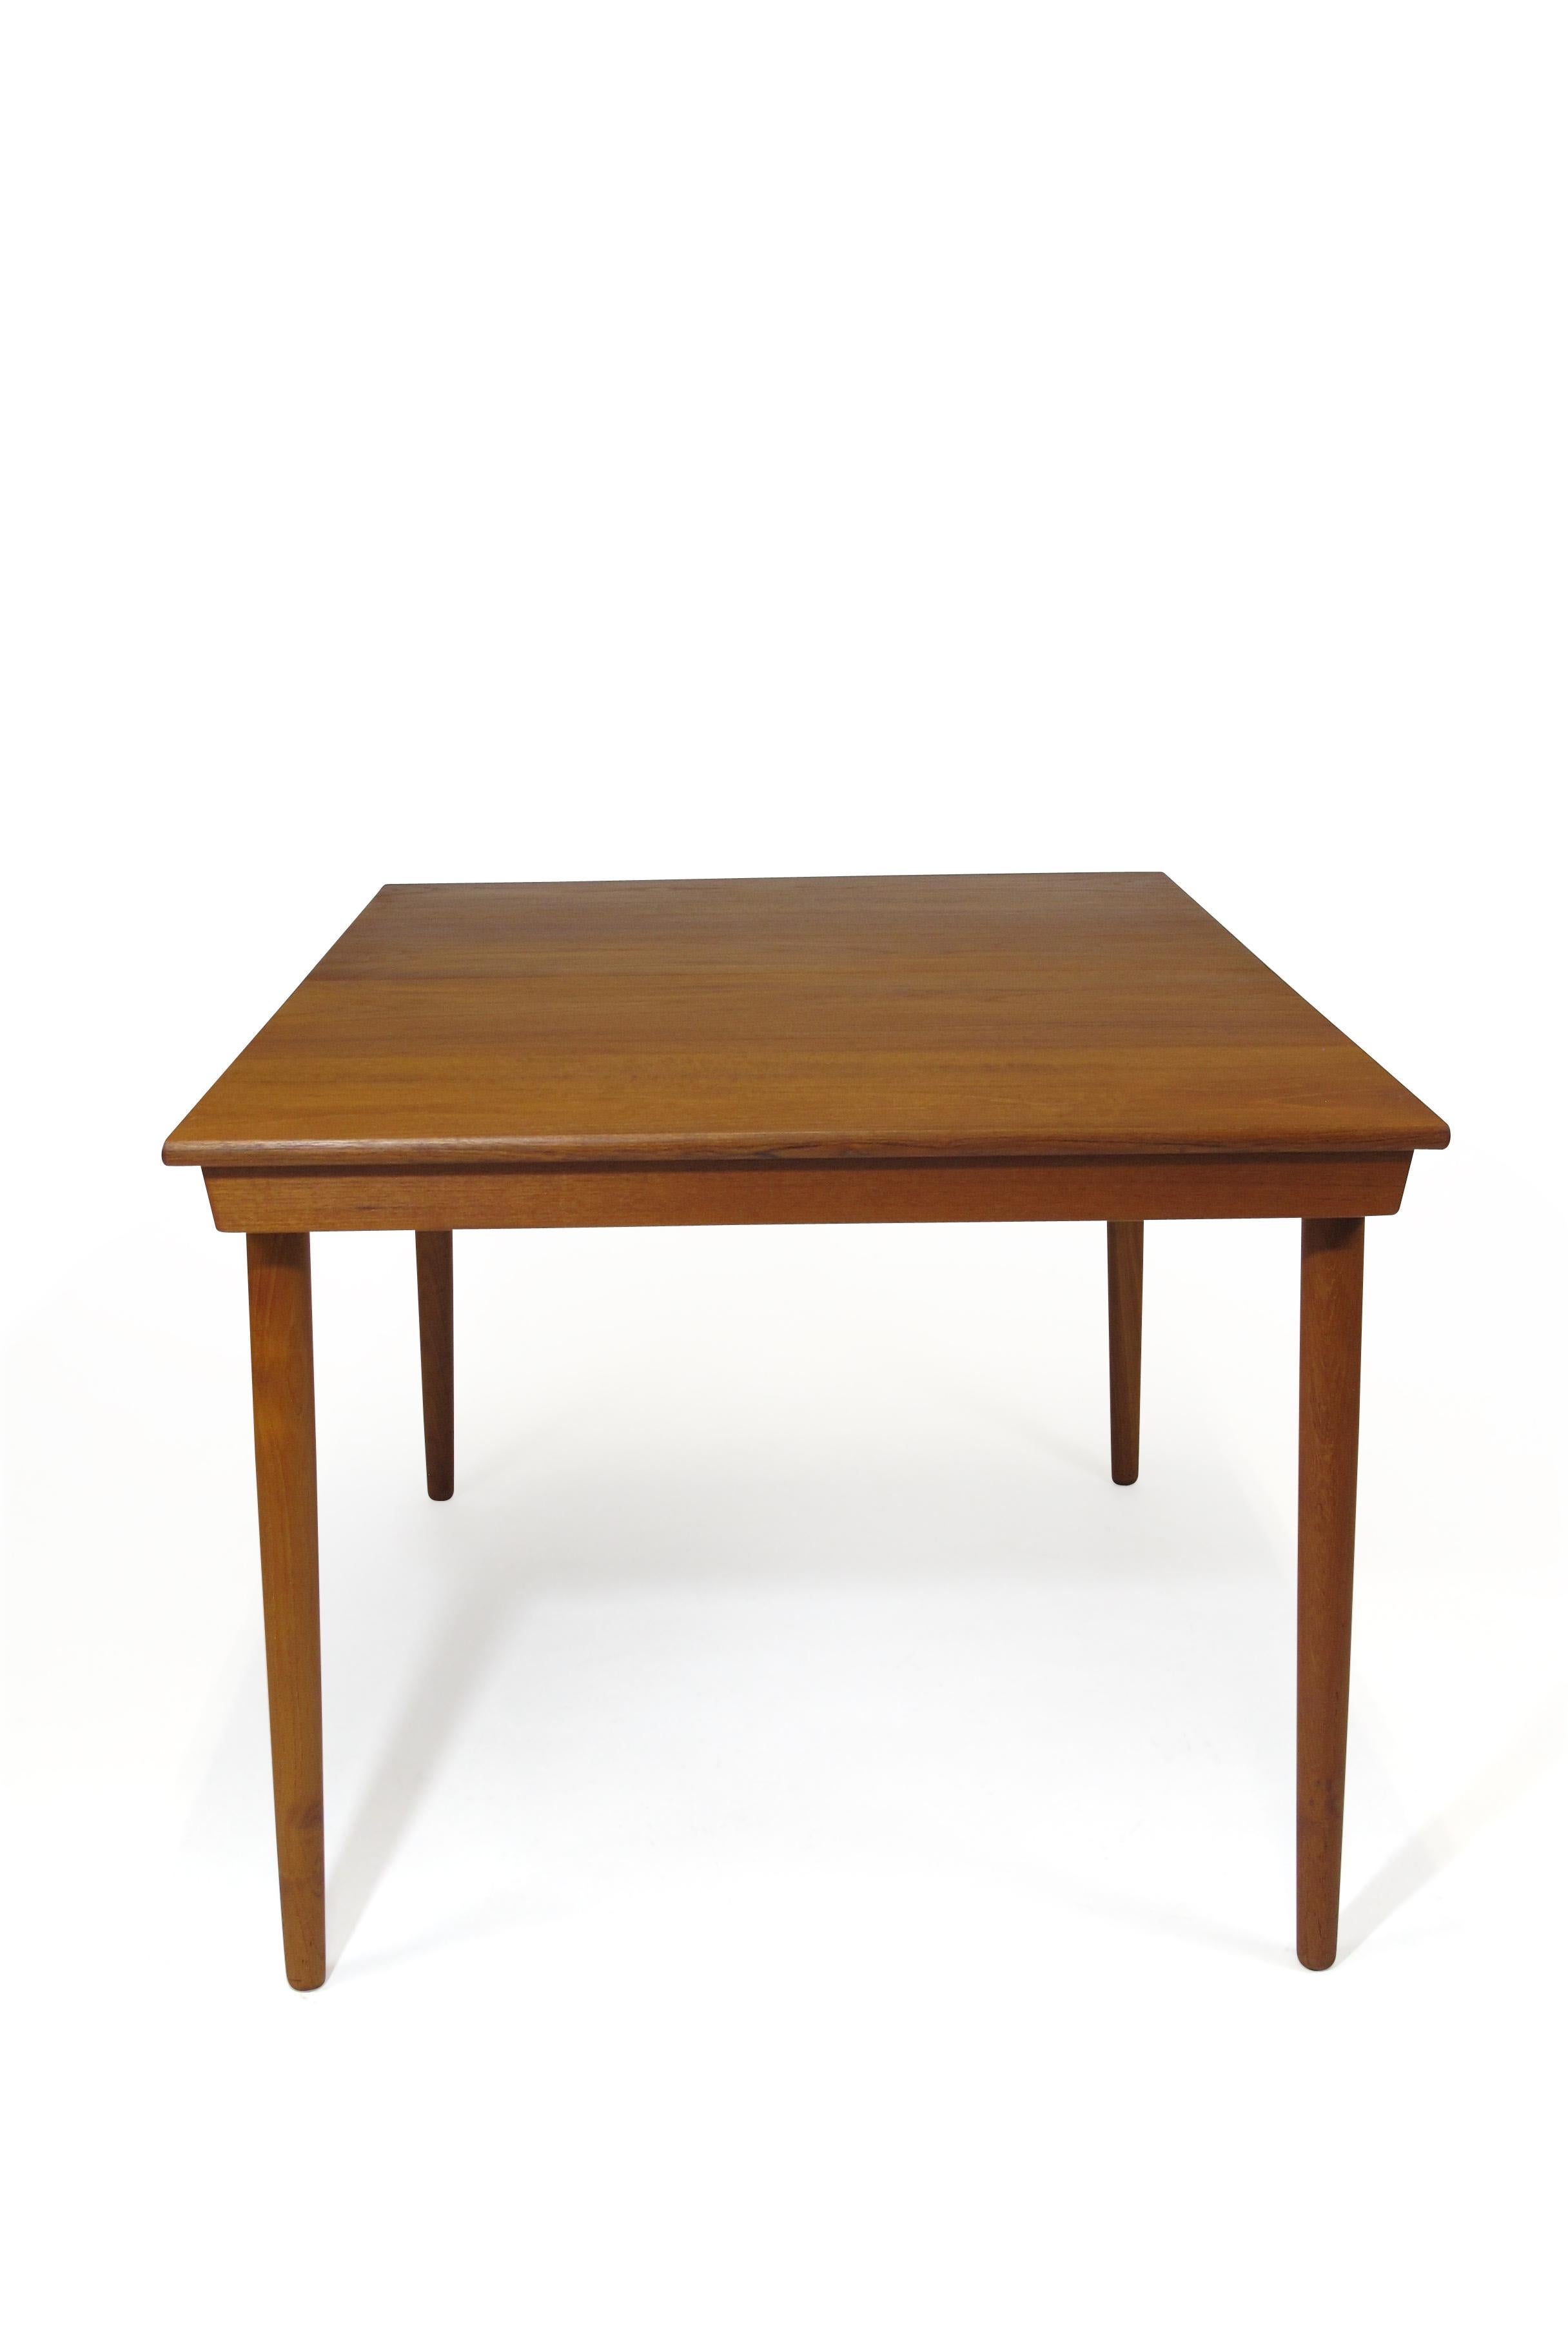 Midcentury teak dining table designed by Hans Olsen for Frem Rojle model 720/21, circa 1961, Denmark. Table seats 6 closed and up to 8 guests comfortably with butterfly leaf extended. Fully restored in excellent condition. Full extension with